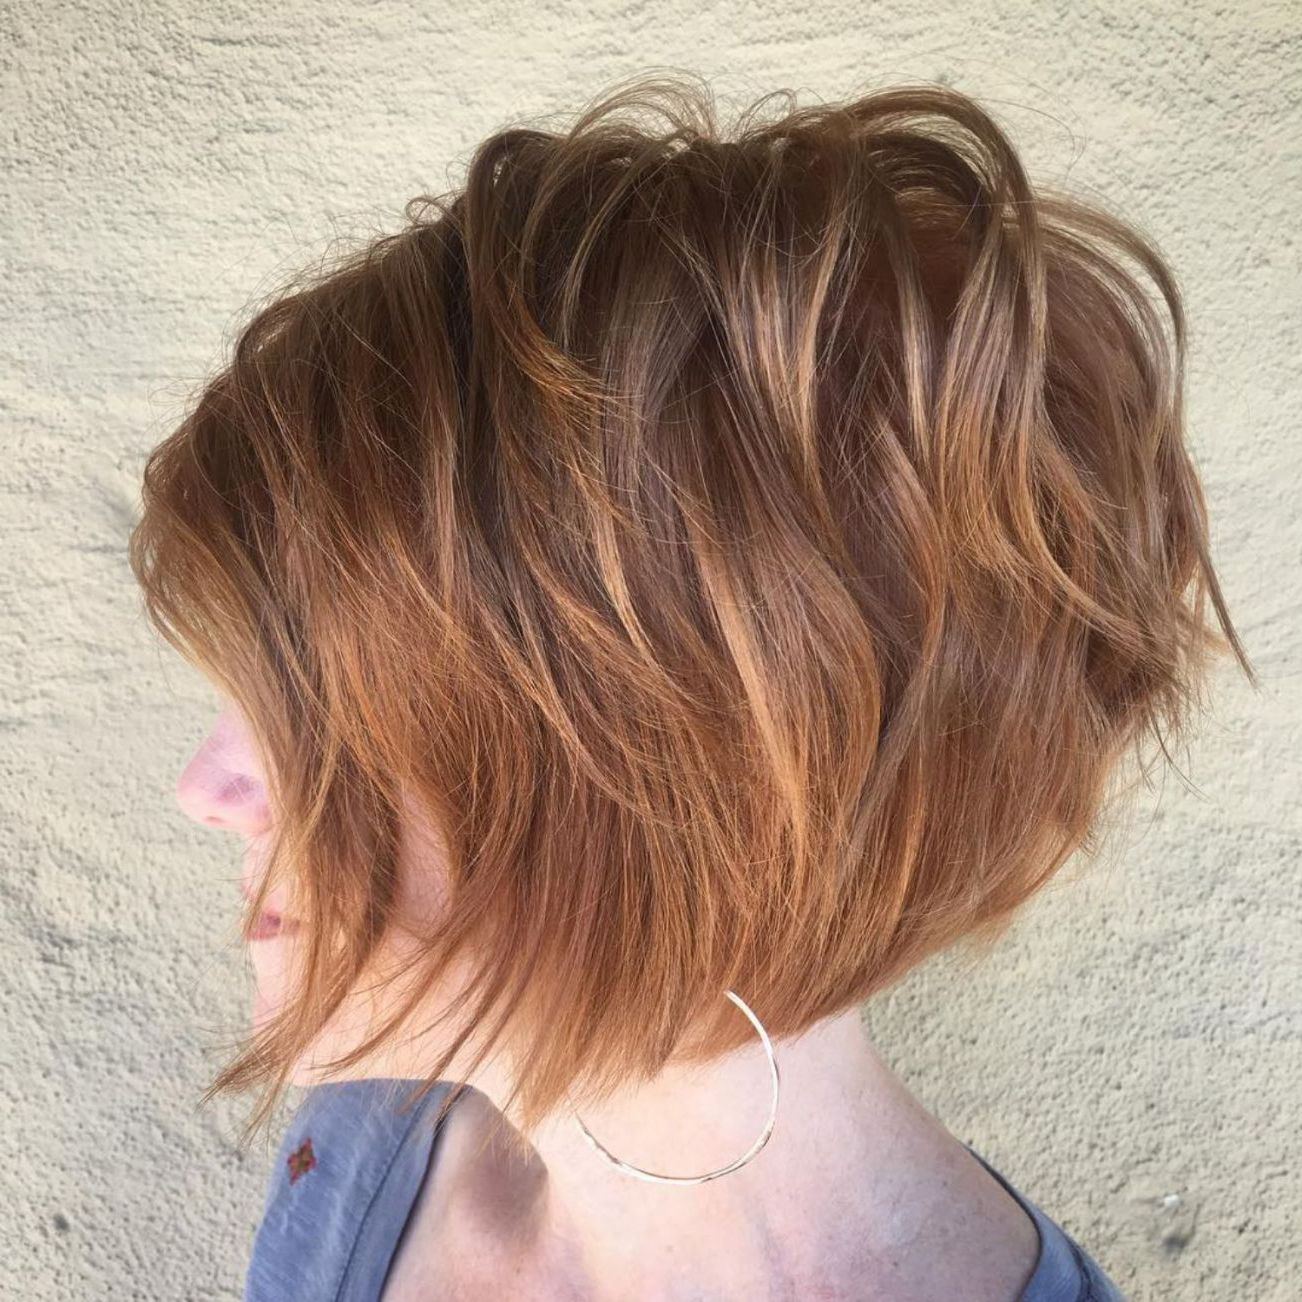 60 Short Shag Hairstyles That You Simply Can't Miss | Hair Ideas Pertaining To Burgundy And Tangerine Piecey Bob Hairstyles (View 11 of 20)